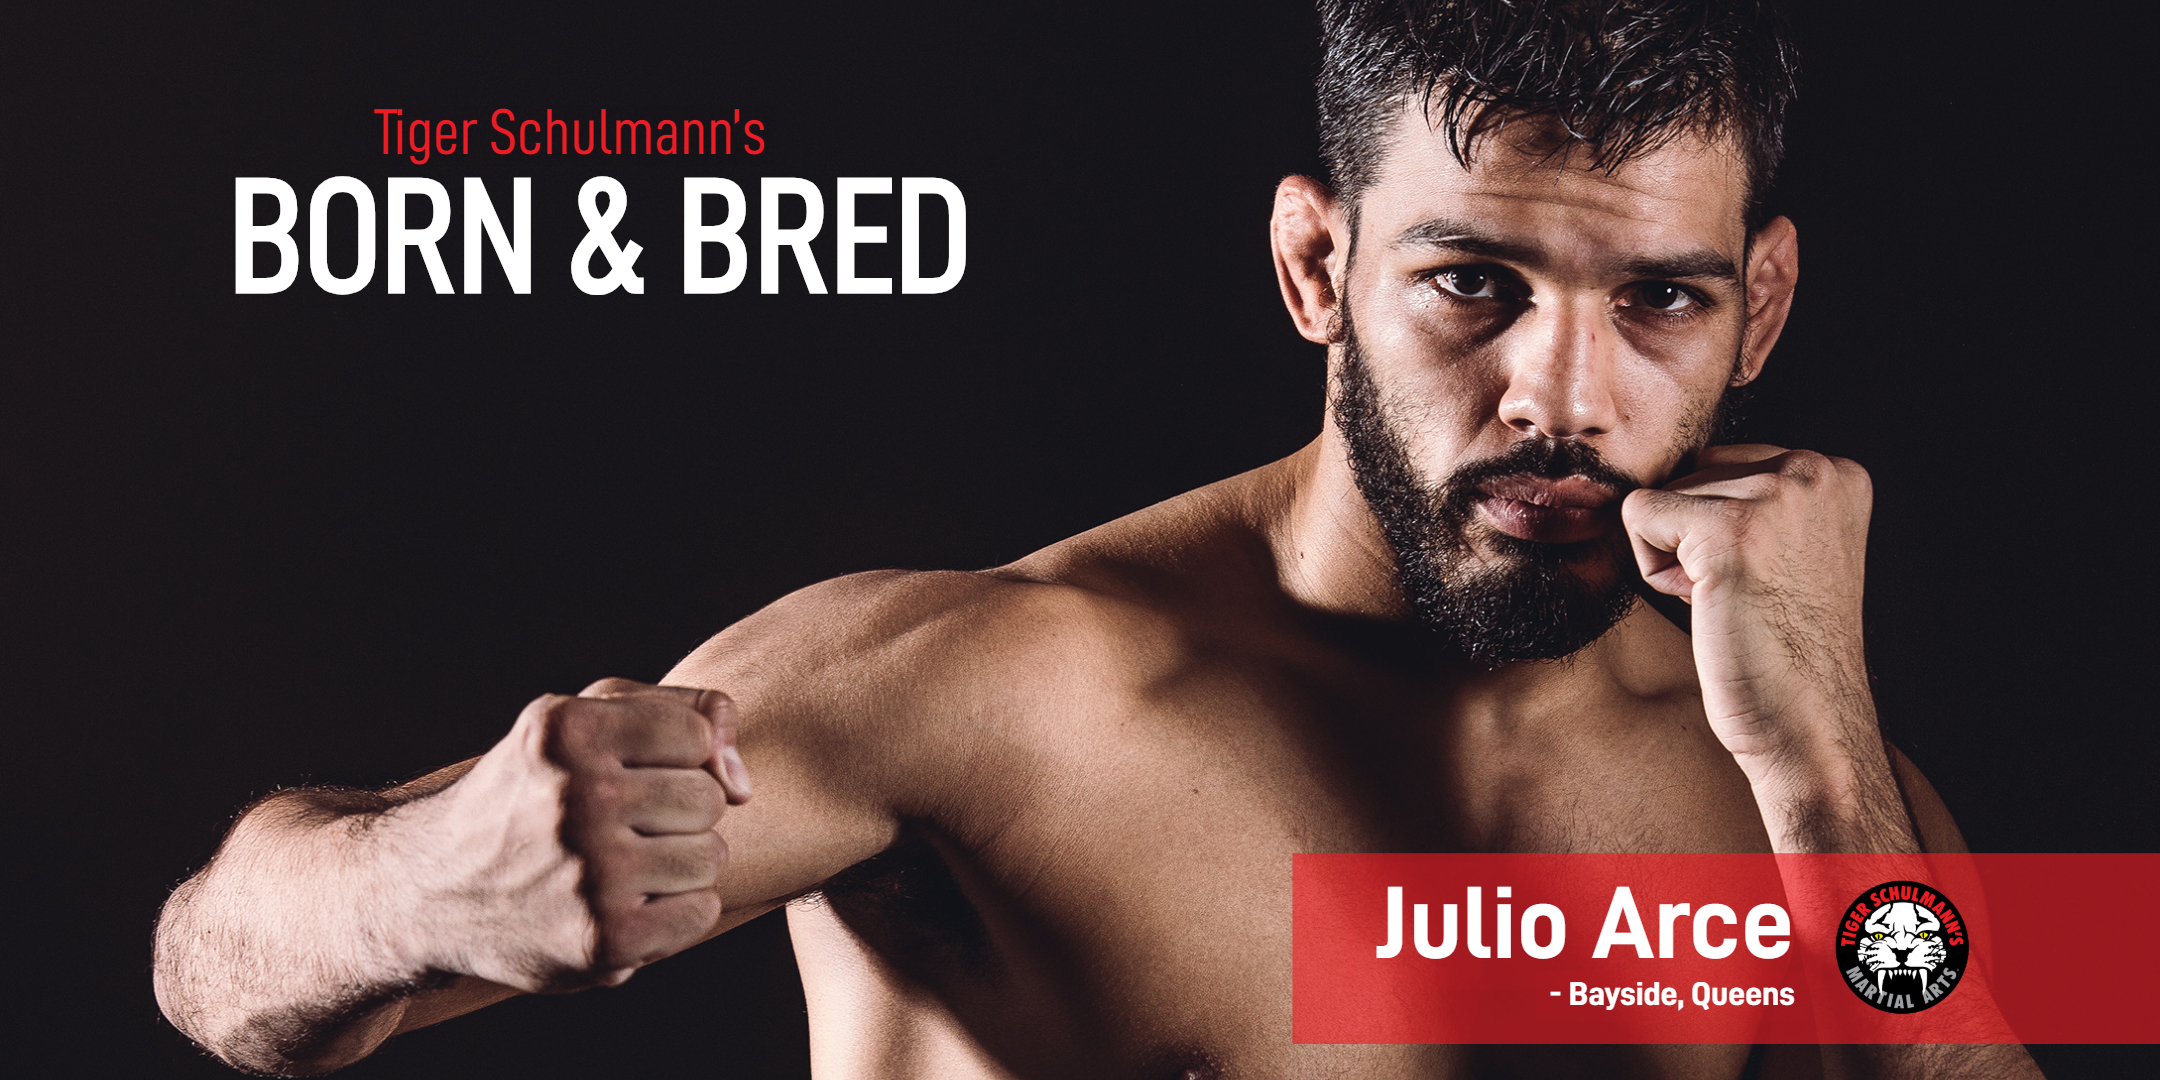 Tiger Schulmann's MMA fighter Julio Arce with fists up